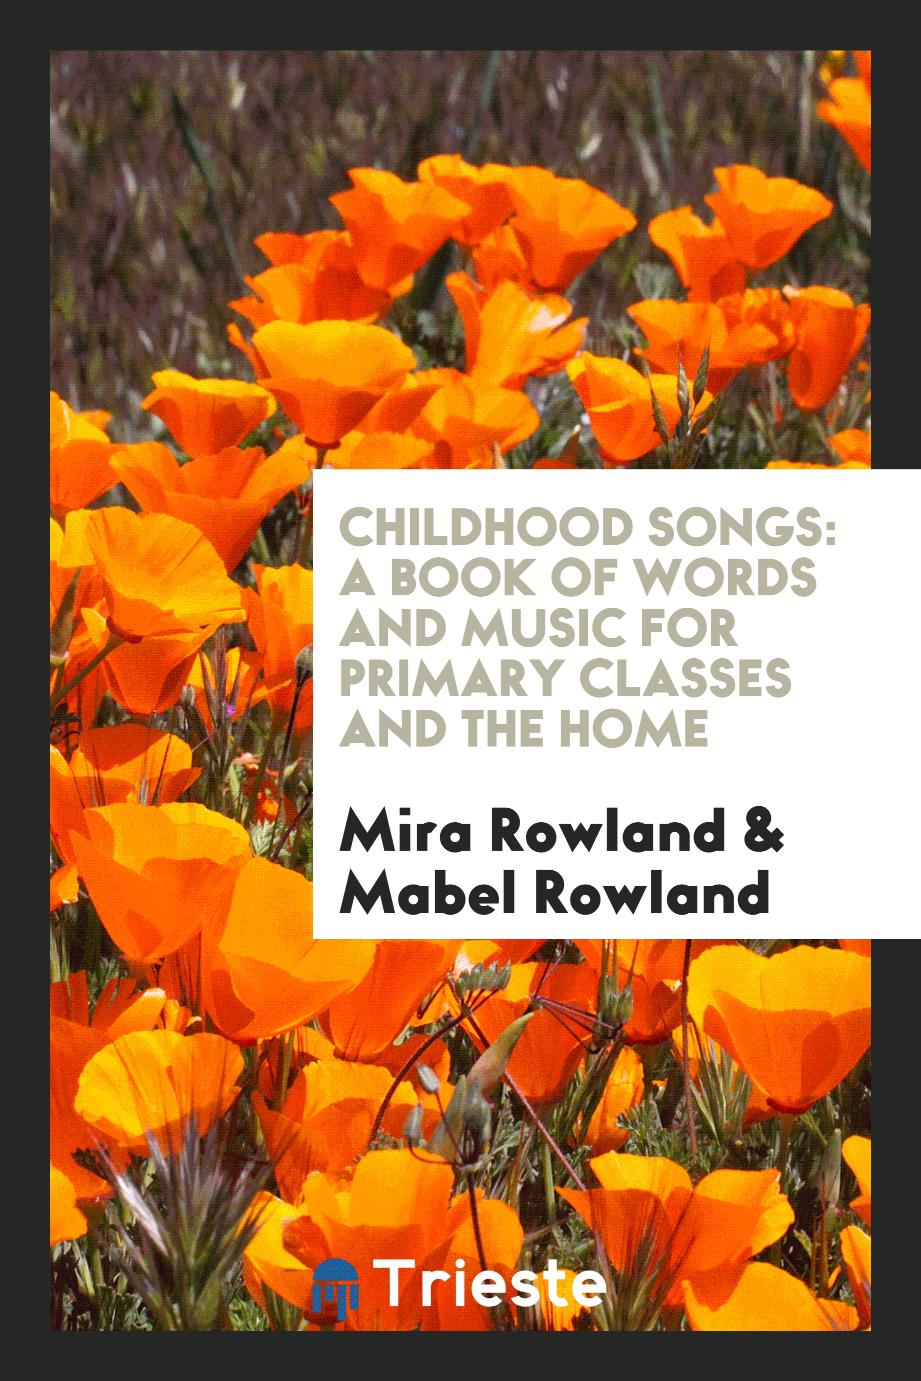 Childhood Songs: A Book of Words and Music for Primary Classes and the Home